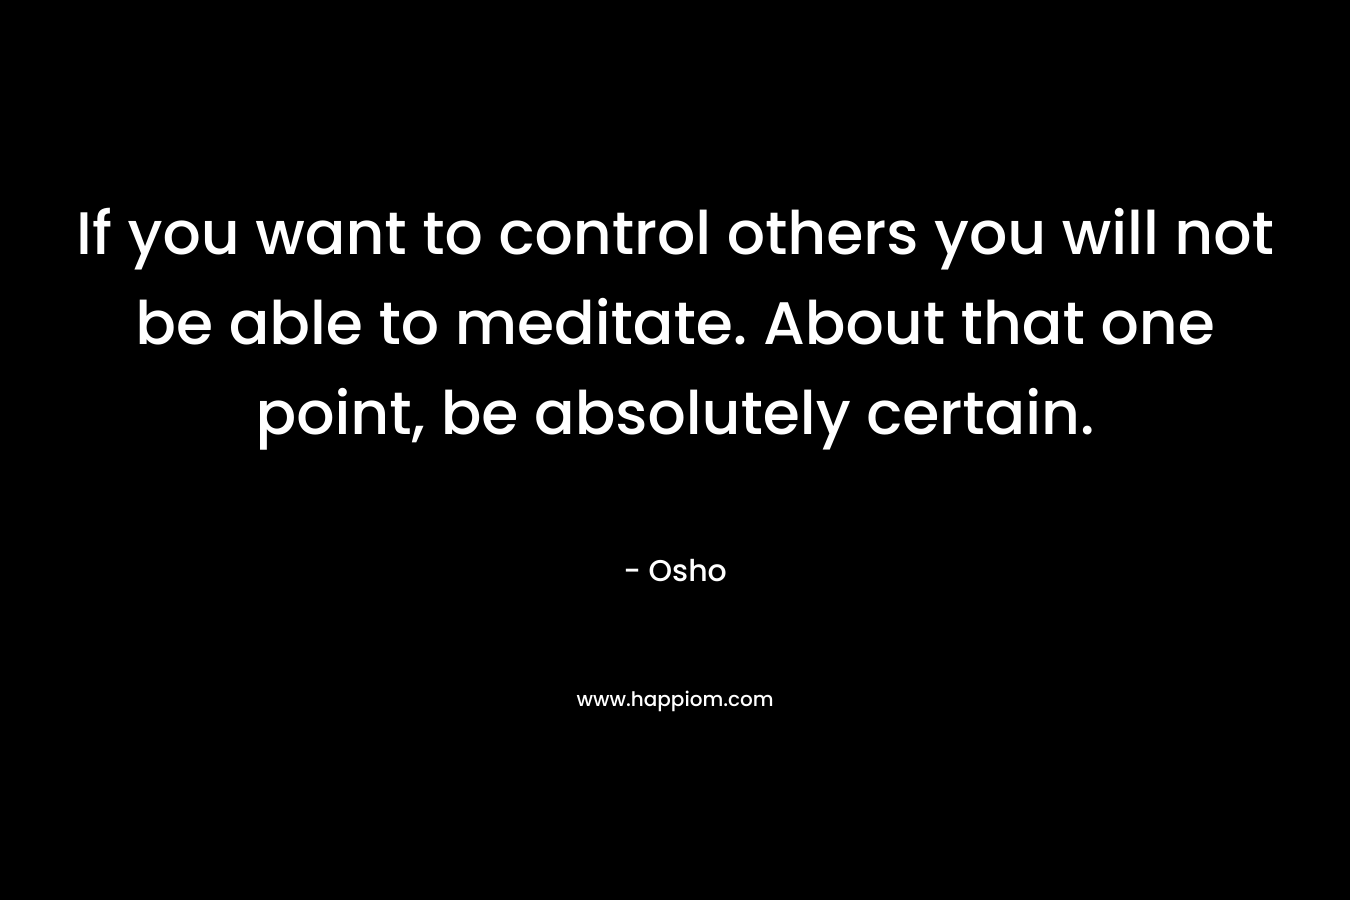 If you want to control others you will not be able to meditate. About that one point, be absolutely certain.